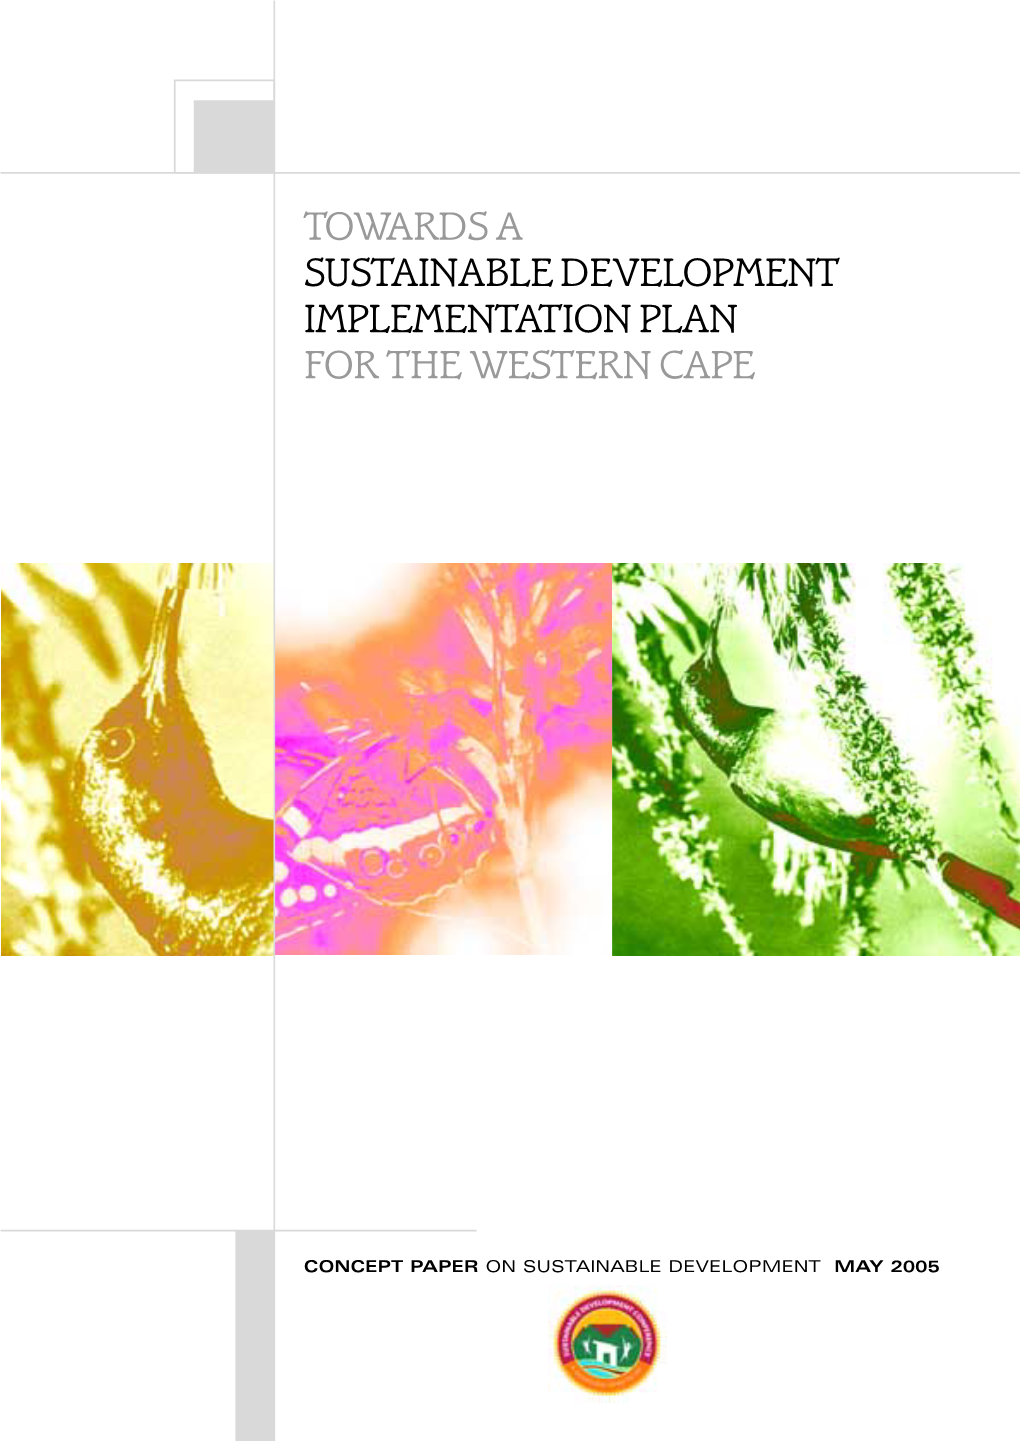 Towards a Sustainable Development Implementation Plan for the Western Cape